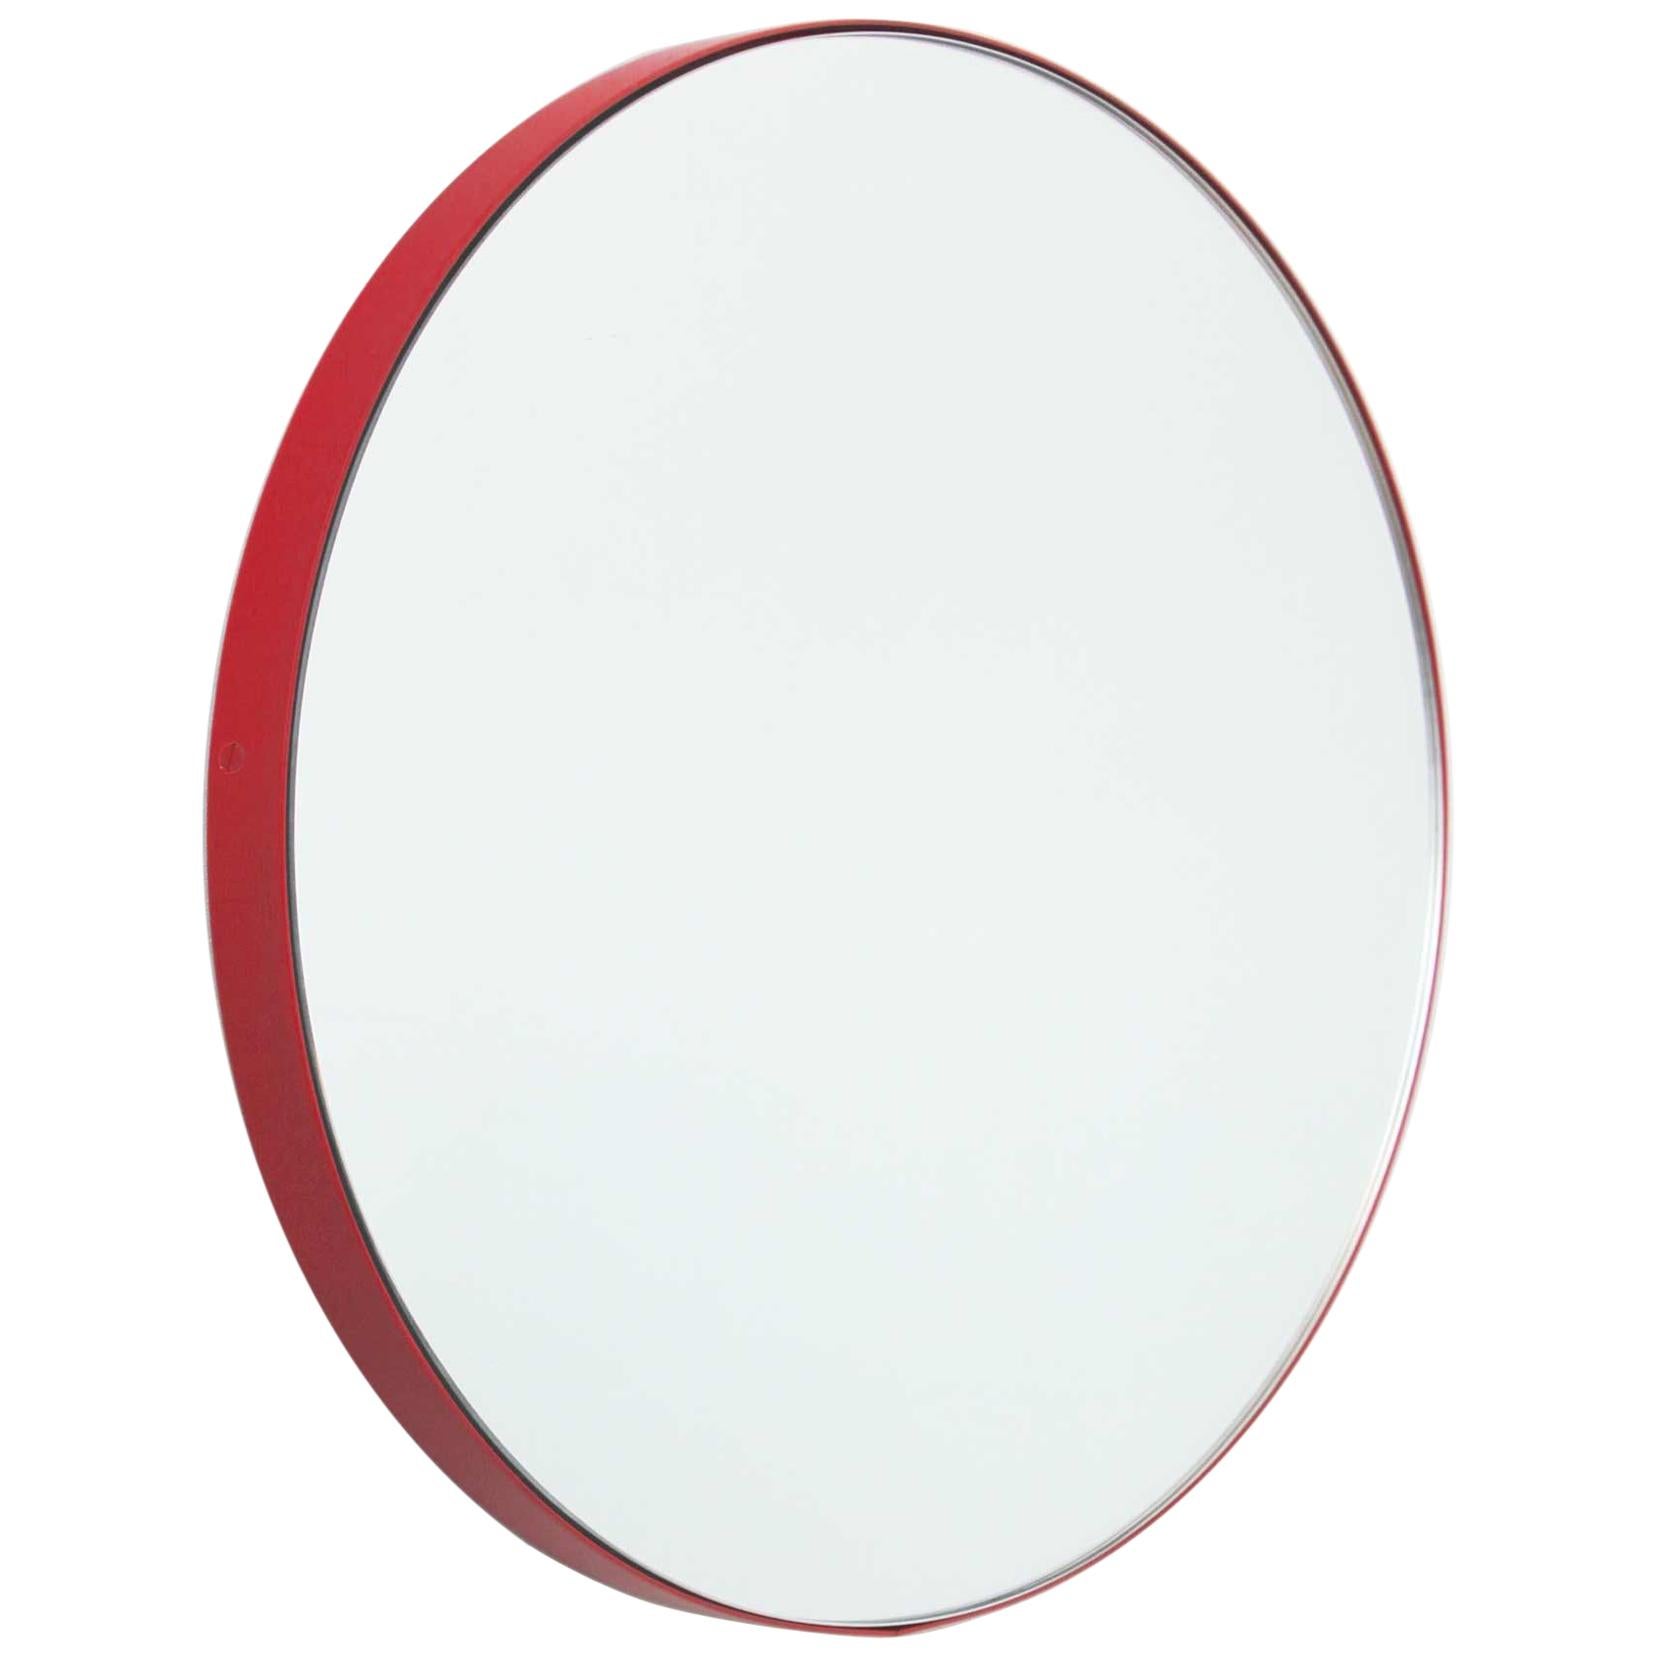 Orbis Round Contemporary Customisable Mirror with Red Frame - Small